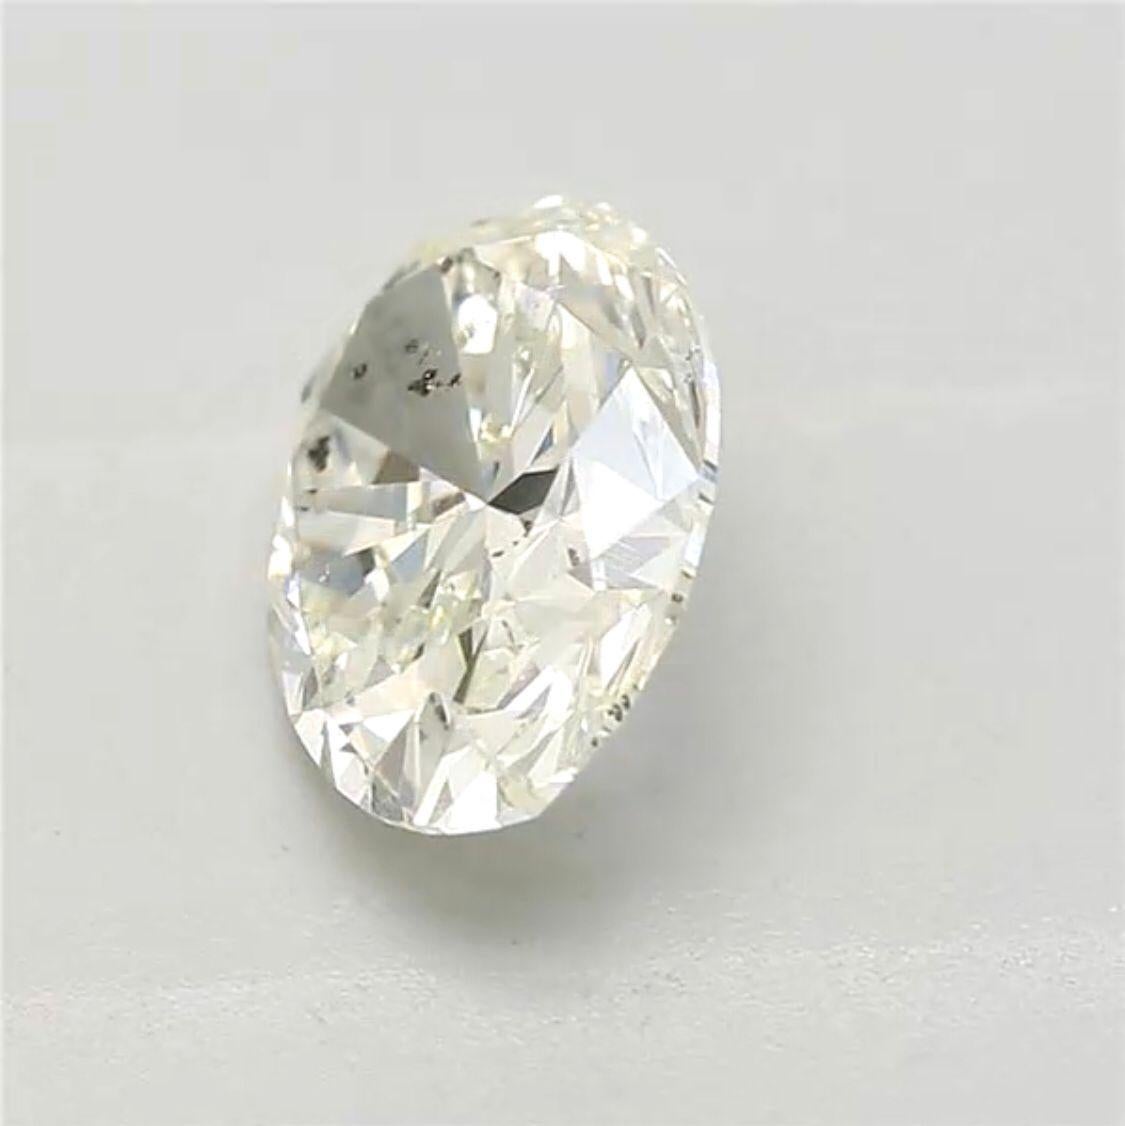 0.81 Carat Very Light Yellow Green Oval cut diamond SI2 Clarity GIA Certified For Sale 1